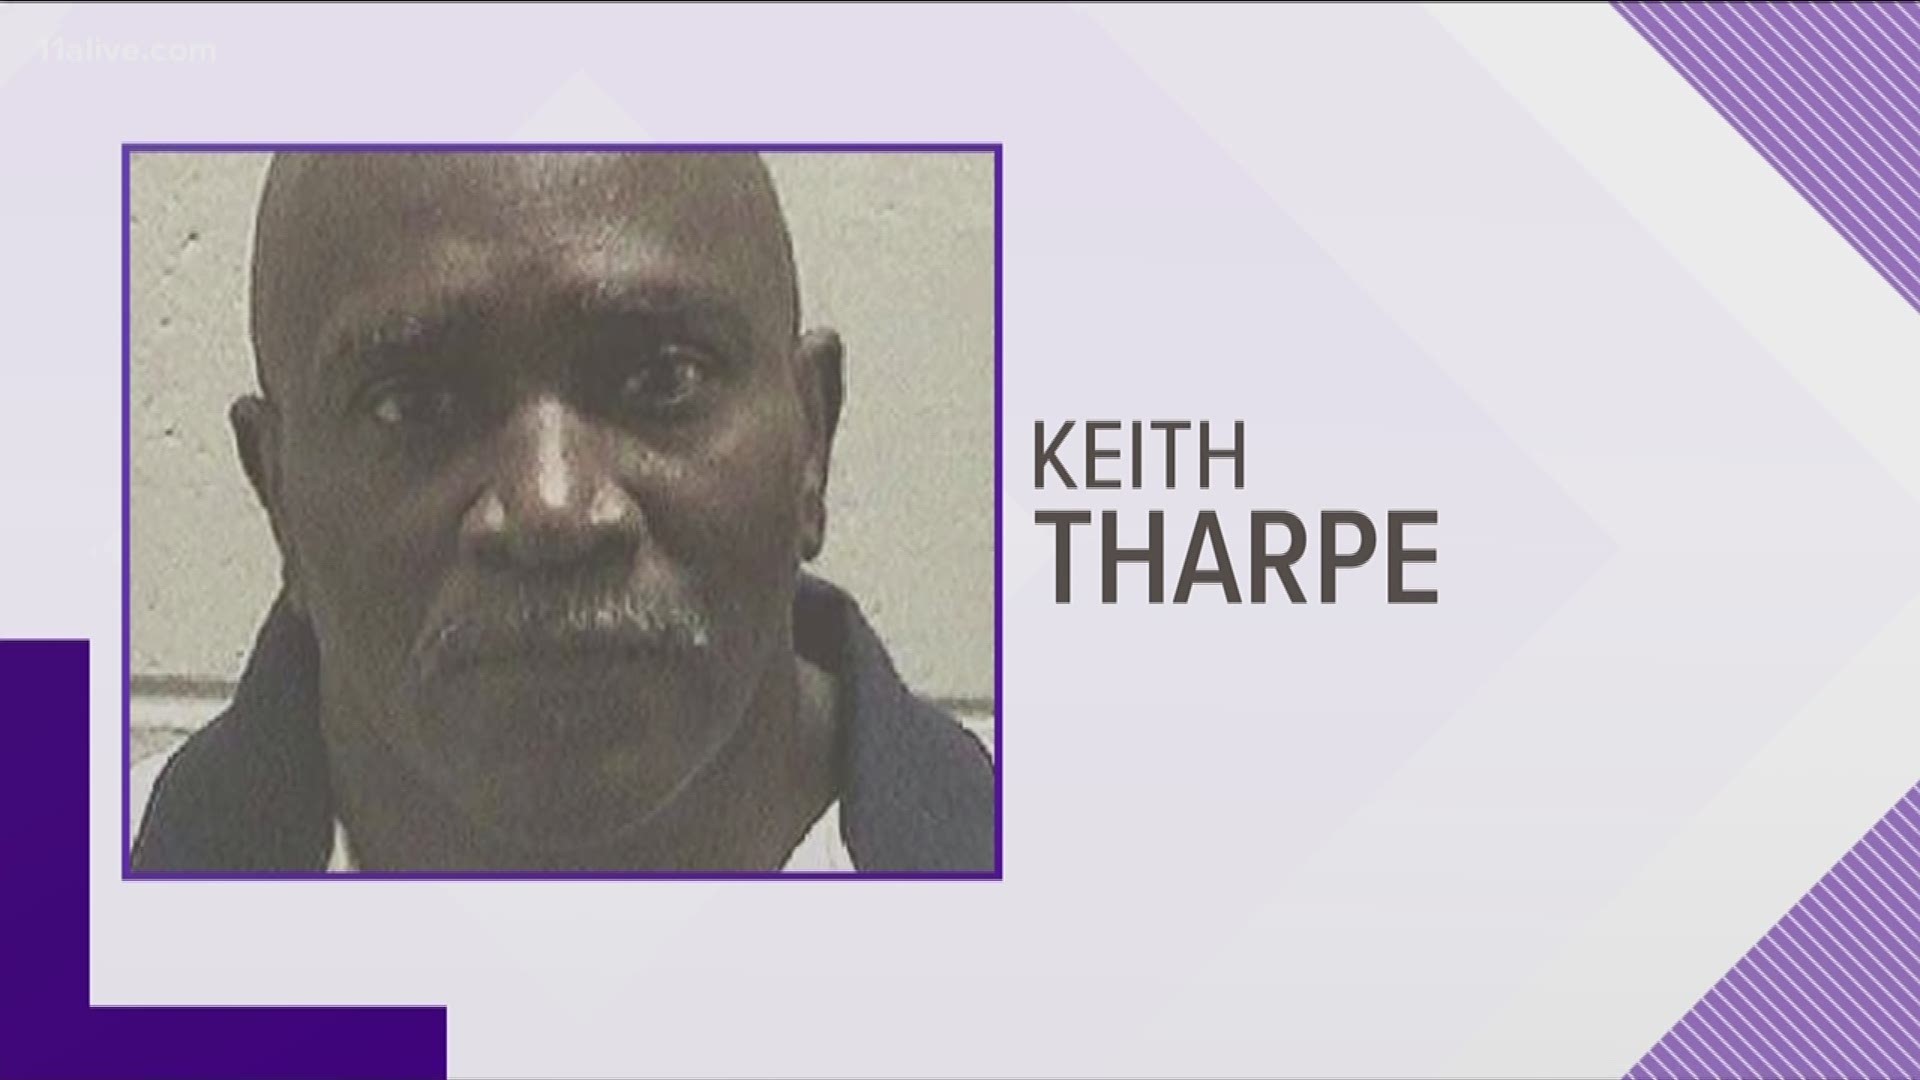 Keith Tharpe was sentenced to death after being accused of killing his sister-in-law in 1990.